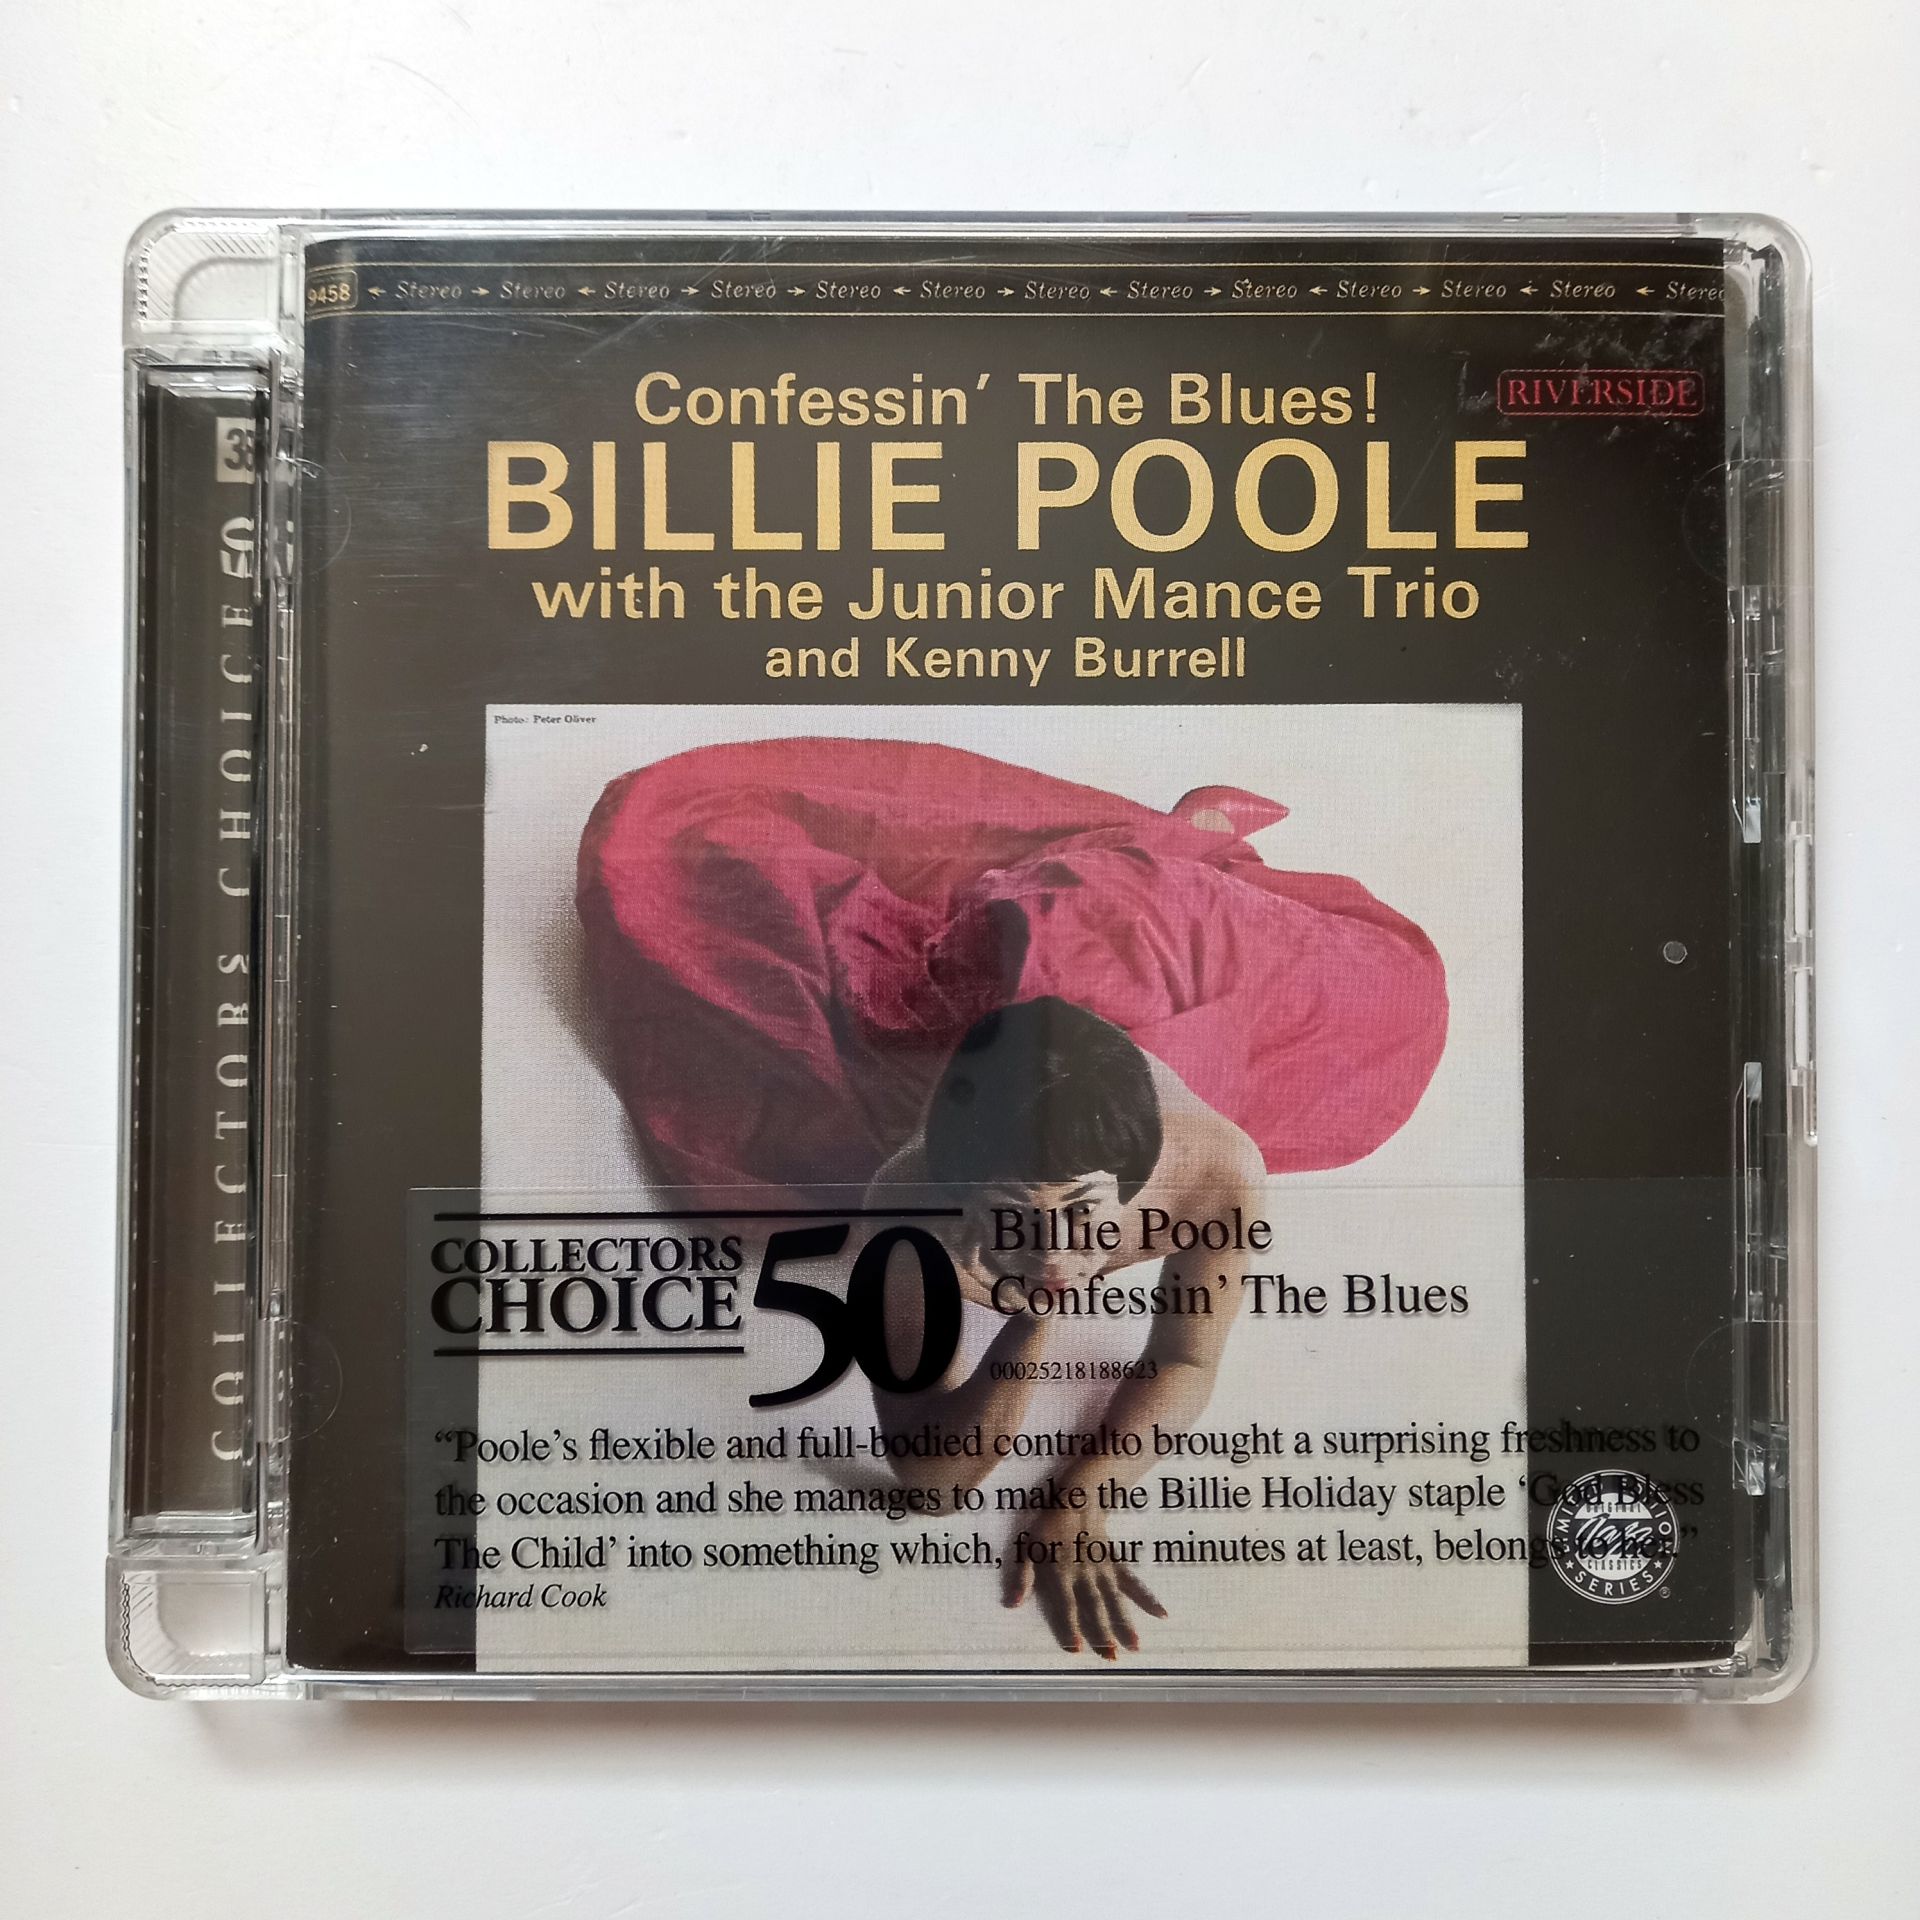 BILLIE POOLE WITH THE JUNIOR MANCE TRIO AND KENNY BURRELL – CONFESSIN' THE BLUES (1996) - CD 2.EL